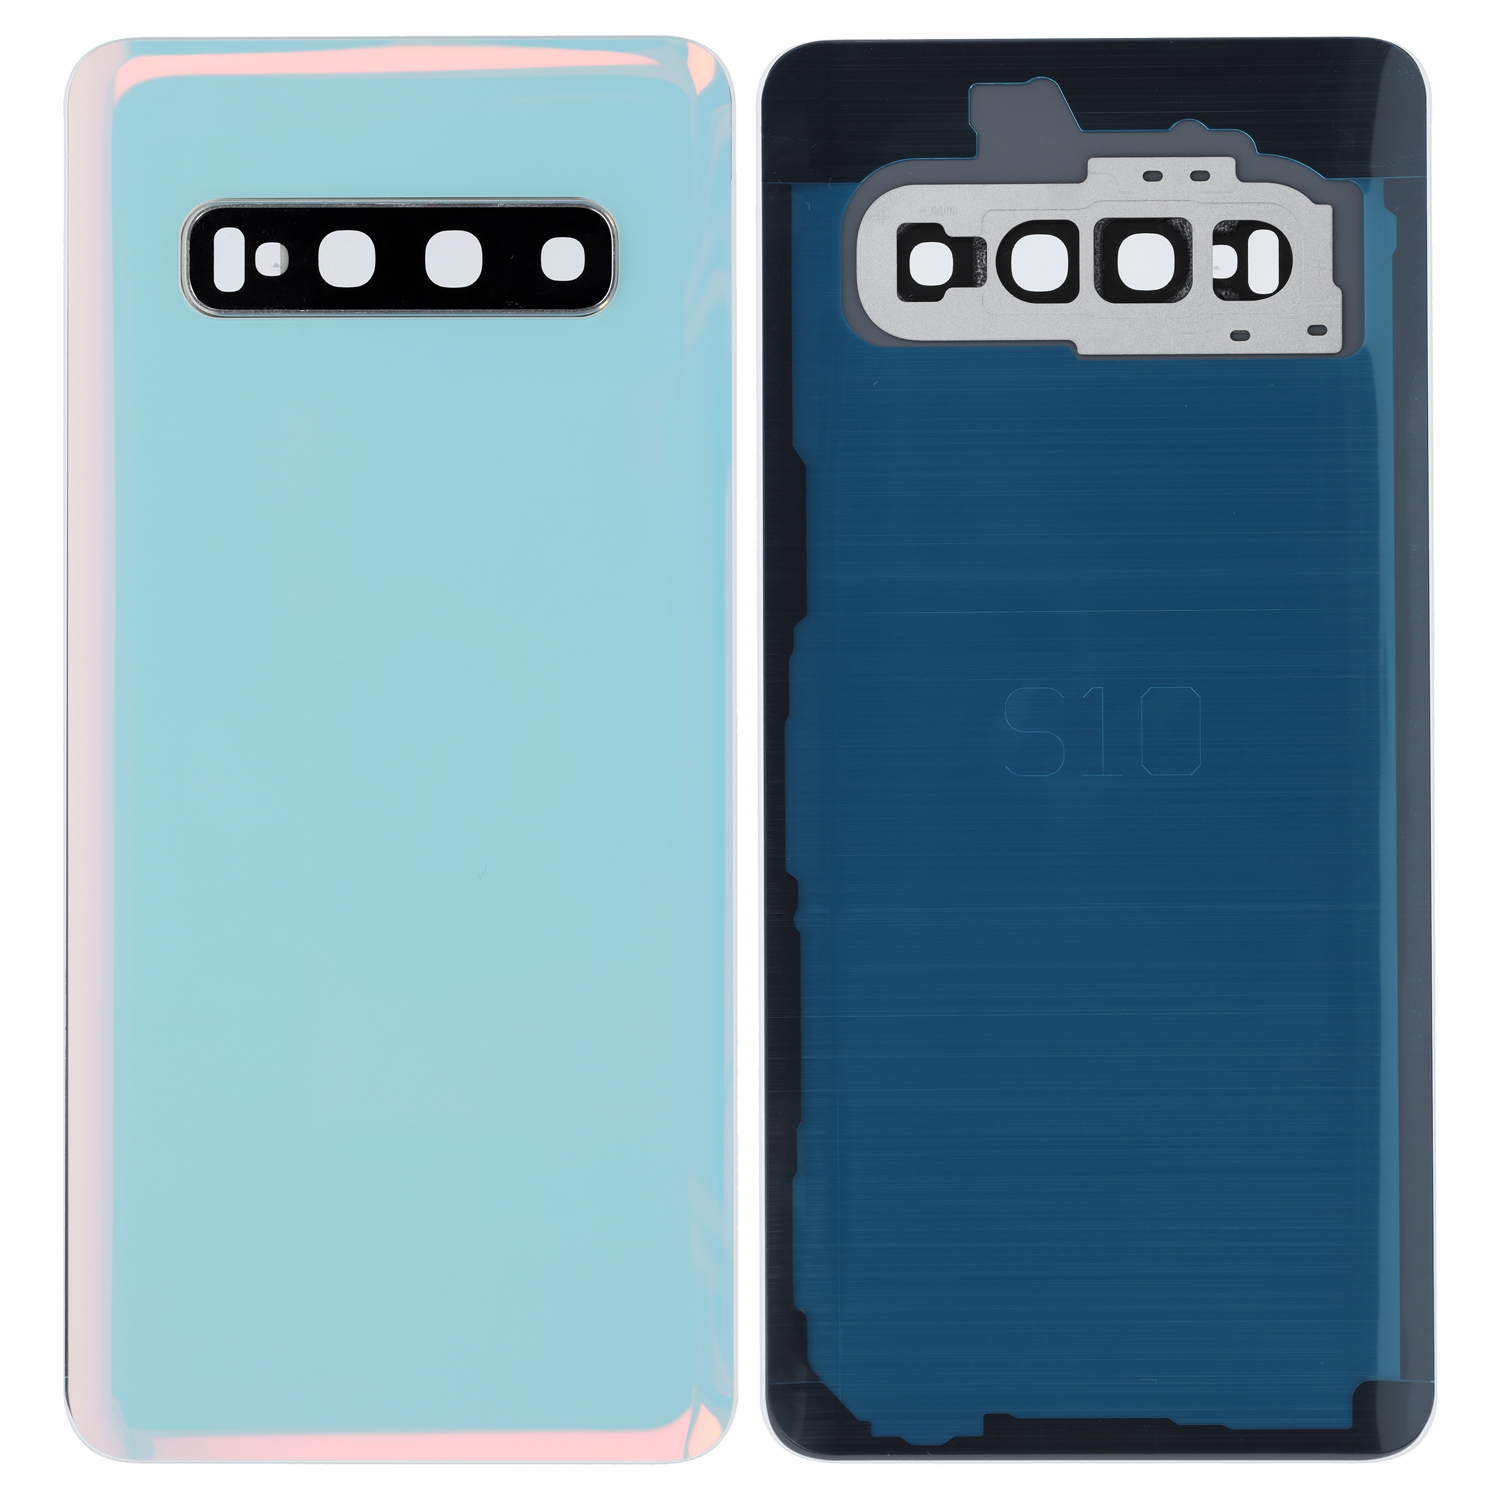 Battery Cover compatible to Samsung Galaxy S10 G973F, Prism White